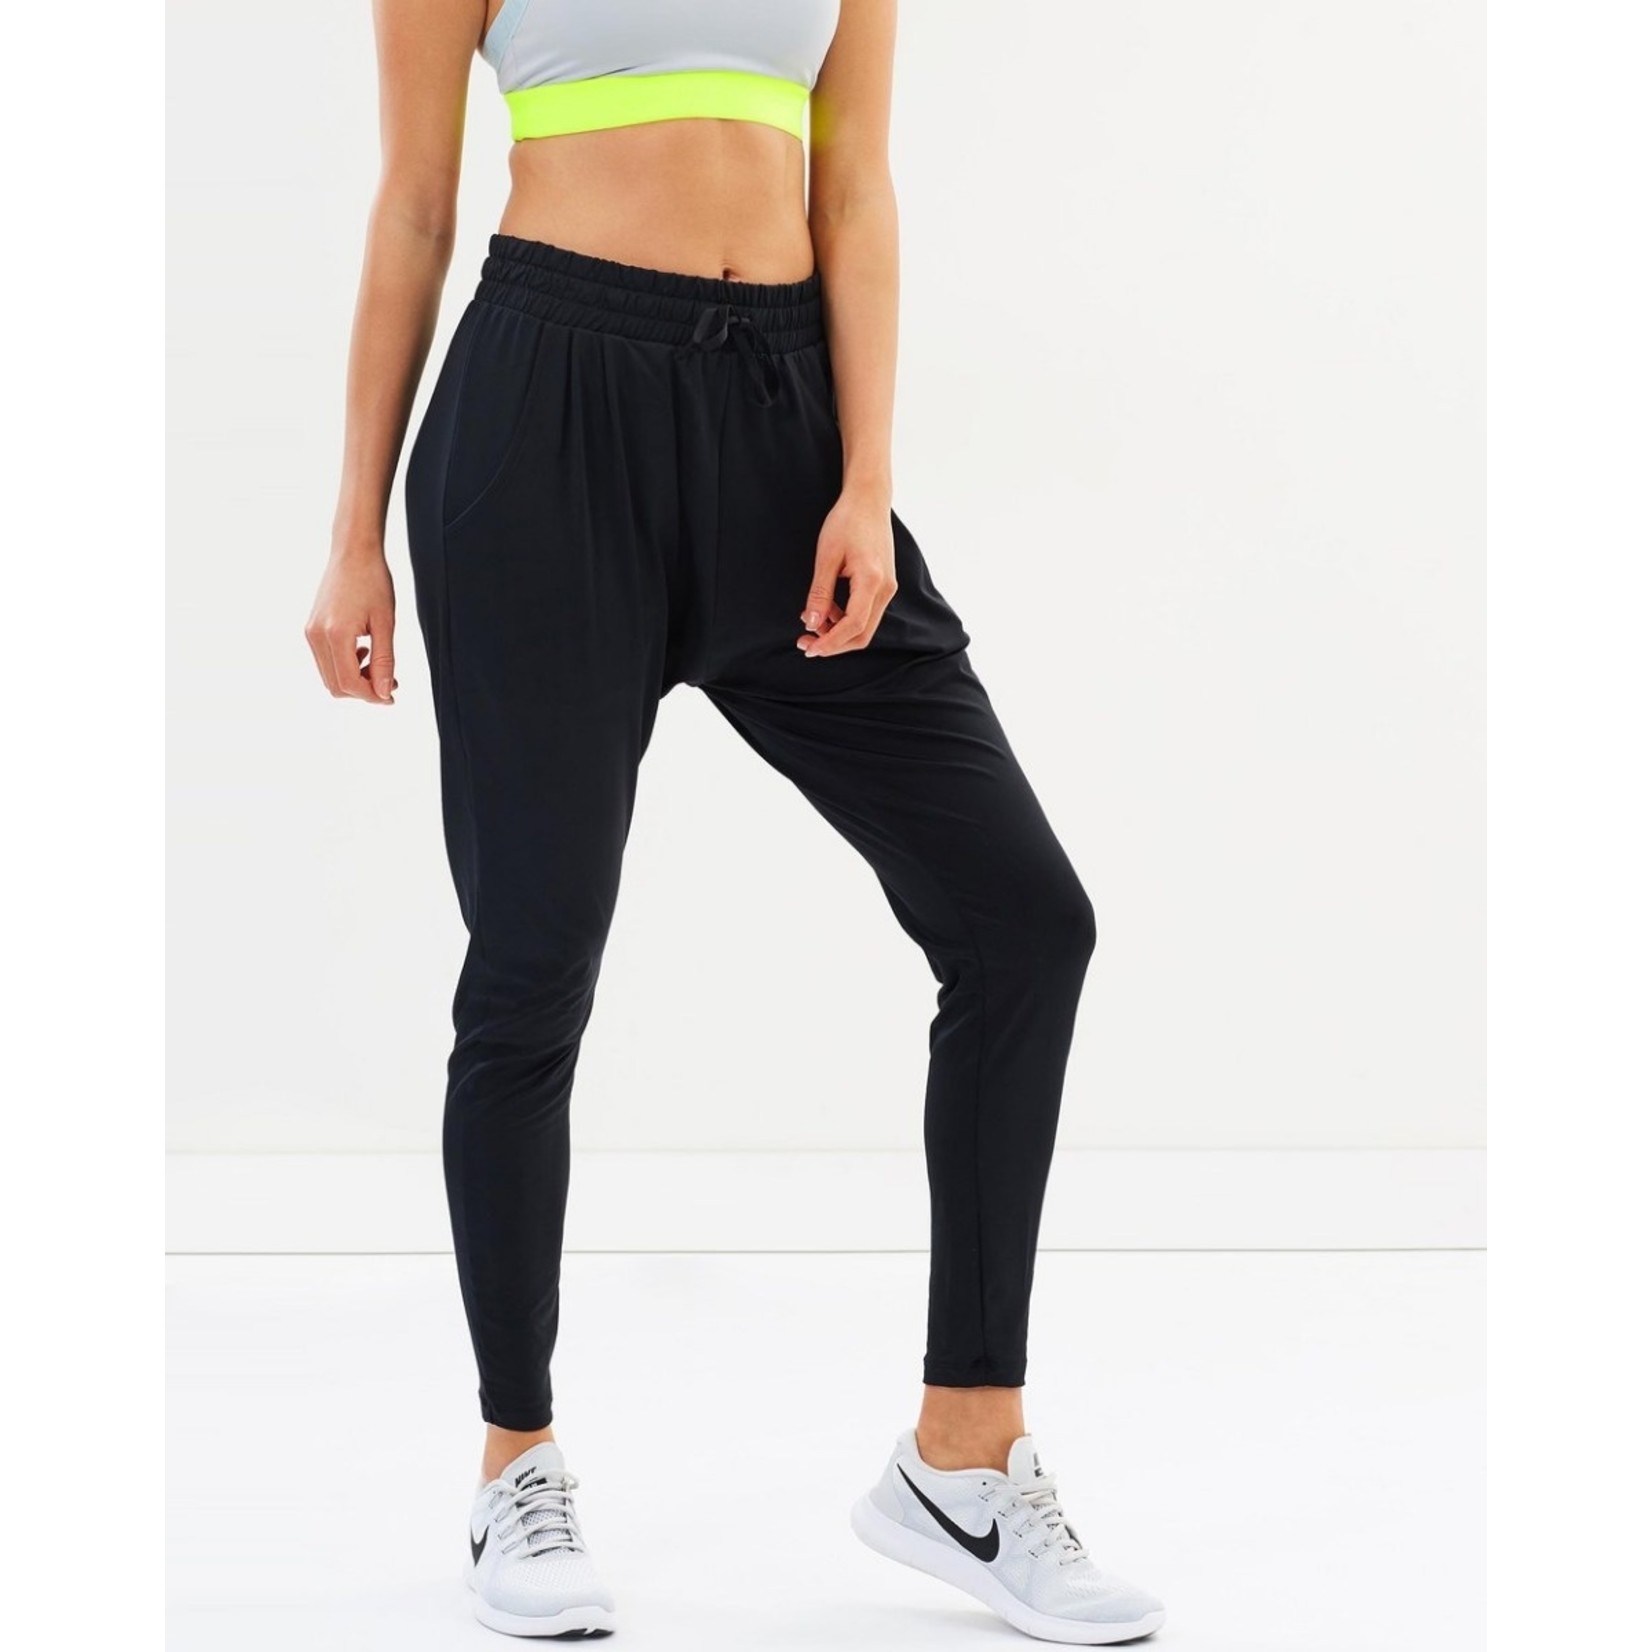 Nike Flow Lux Loose Fit Dance/Yoga Pants - Size M - The Huntress Canada